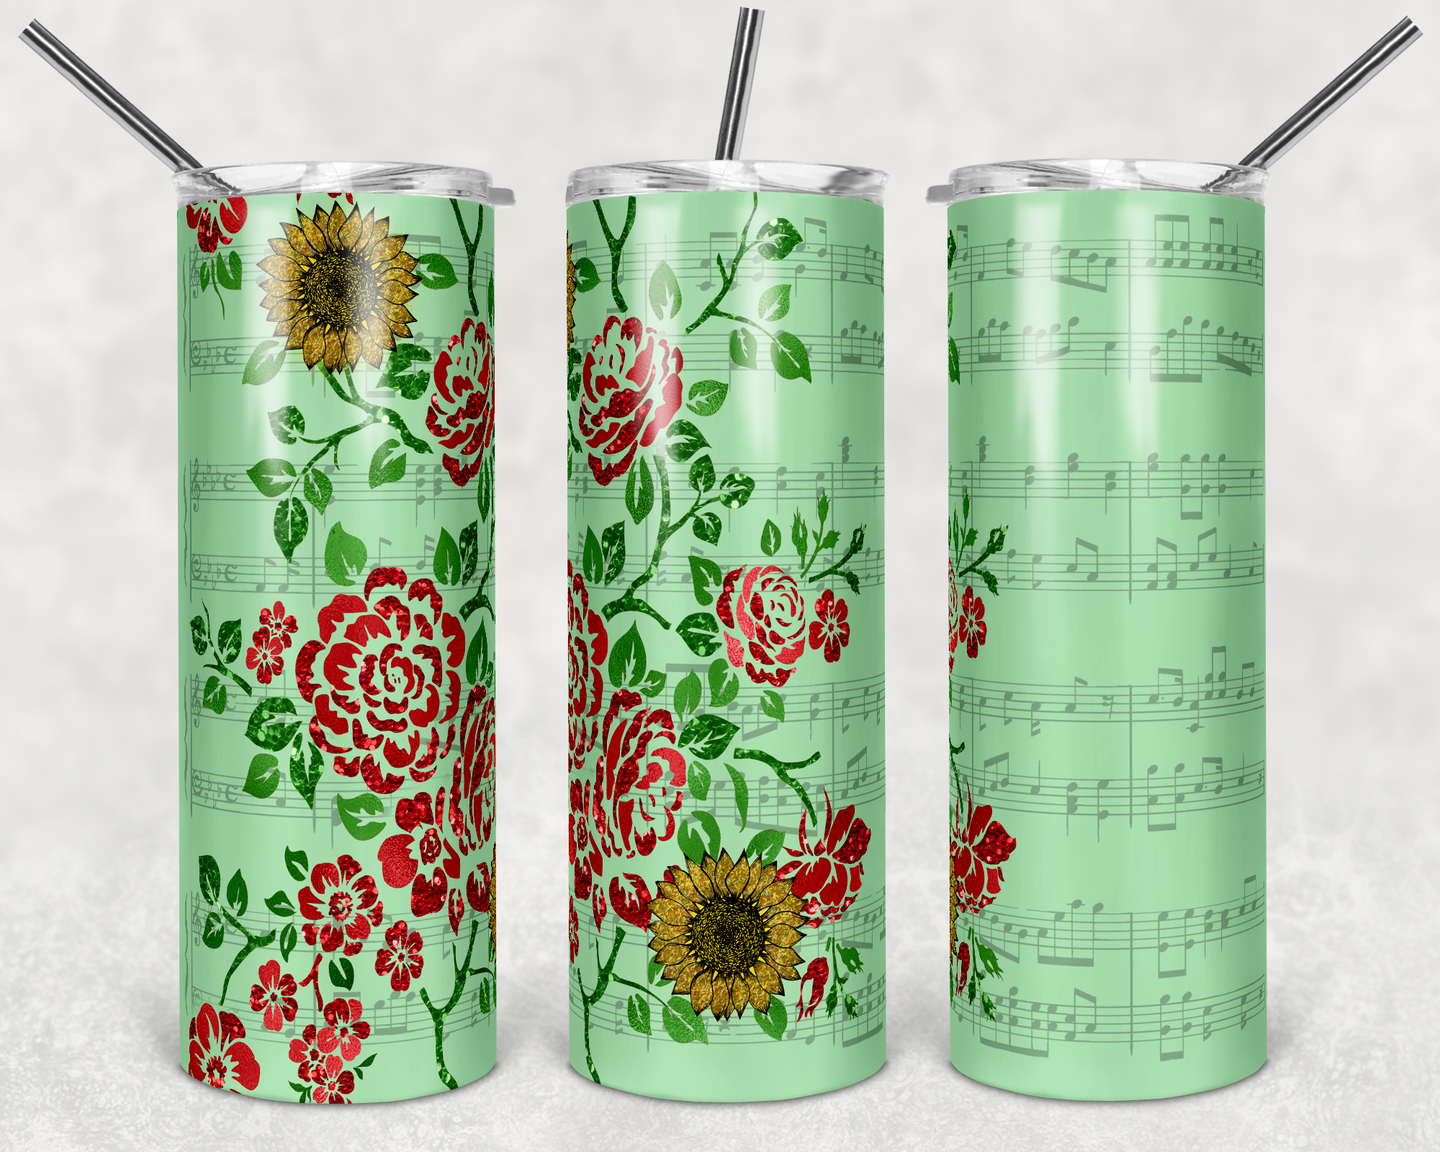 Rose and Sunflower with Sheet Music